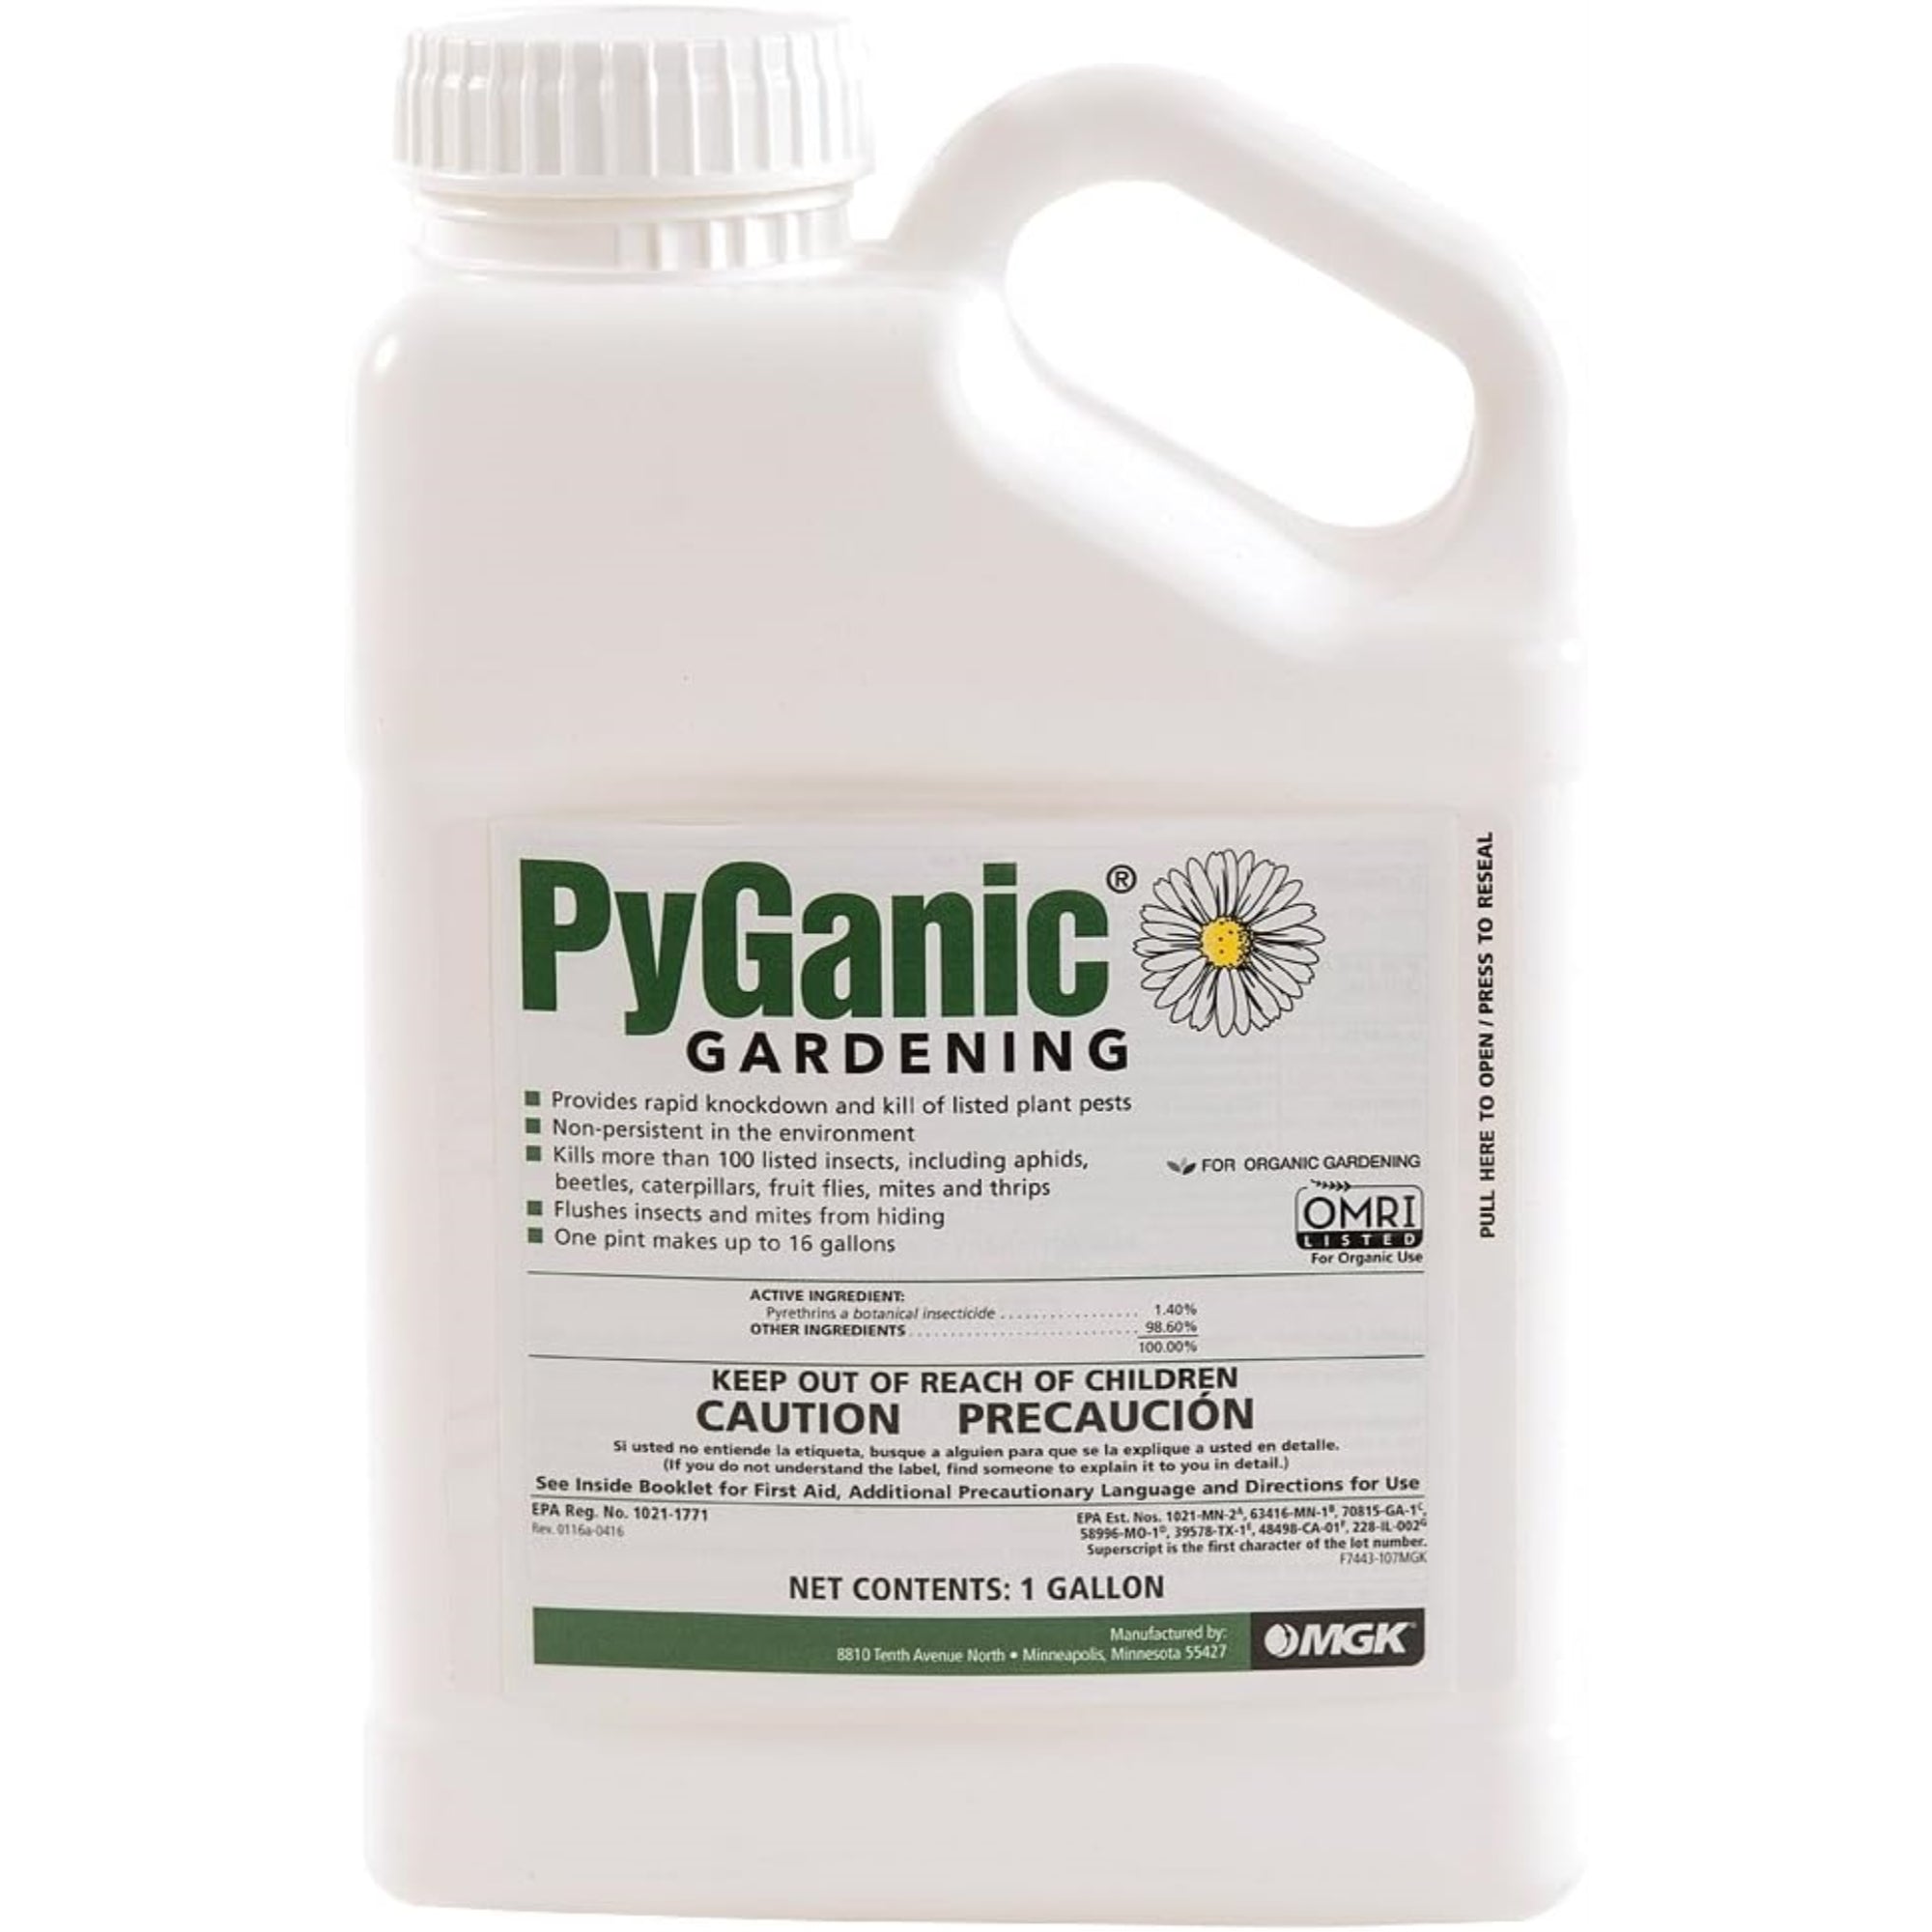 Pyganic Gardening Organic Liquid Insecticide Concentrate For Garden Insects, 1 Gallon